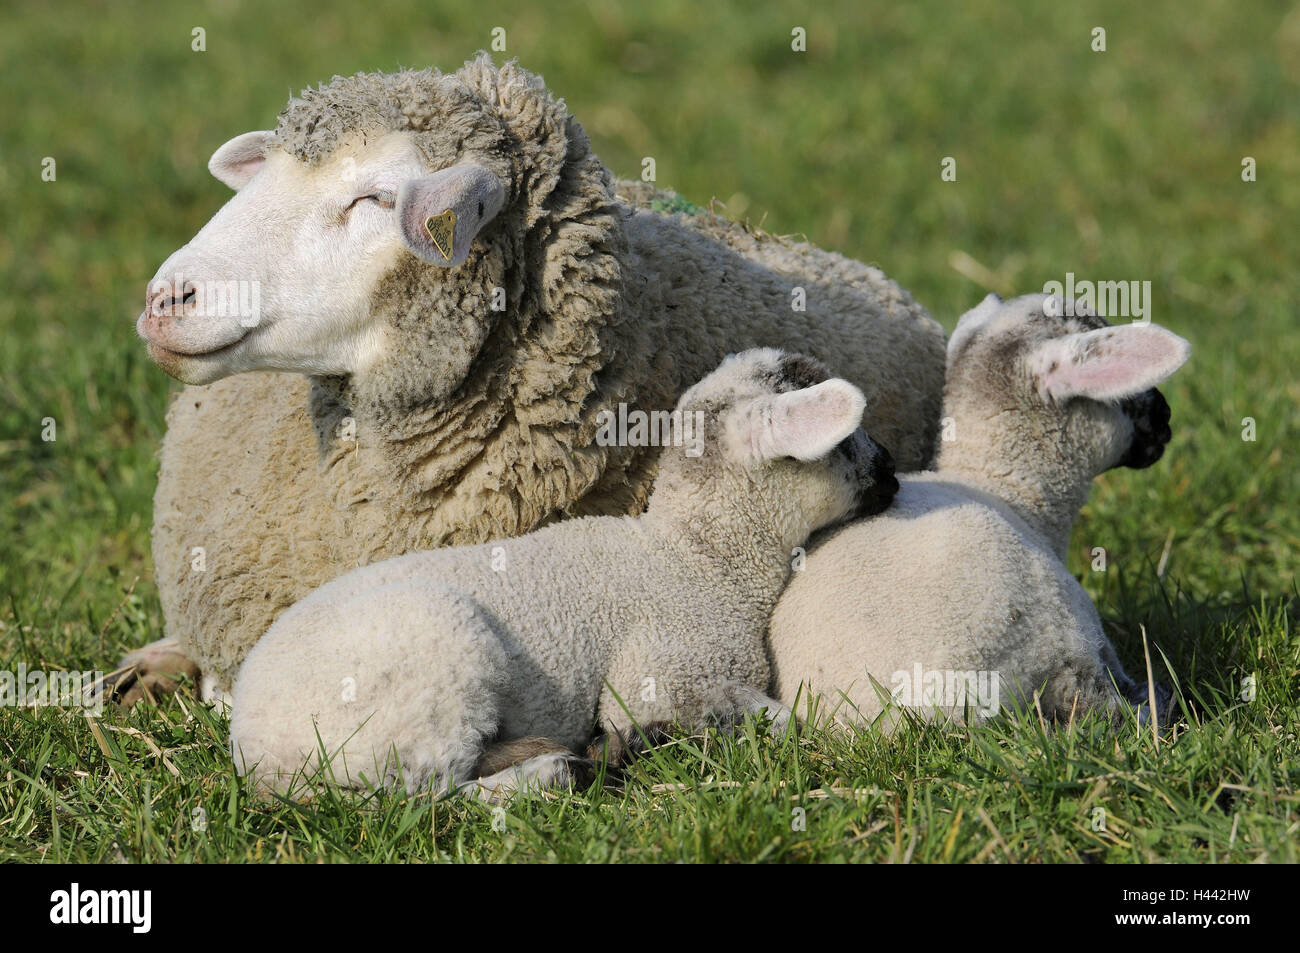 Meadow, merino sheep, mother animal, lambs, nestle up, lie, cuddle animals,  mammals, benefit animals, sheep, Schafrasse, land sheep, merino, young  animals, pasture, outside, agriculture, cattle breeding, keeping pets,  suture, security, instinct Stock